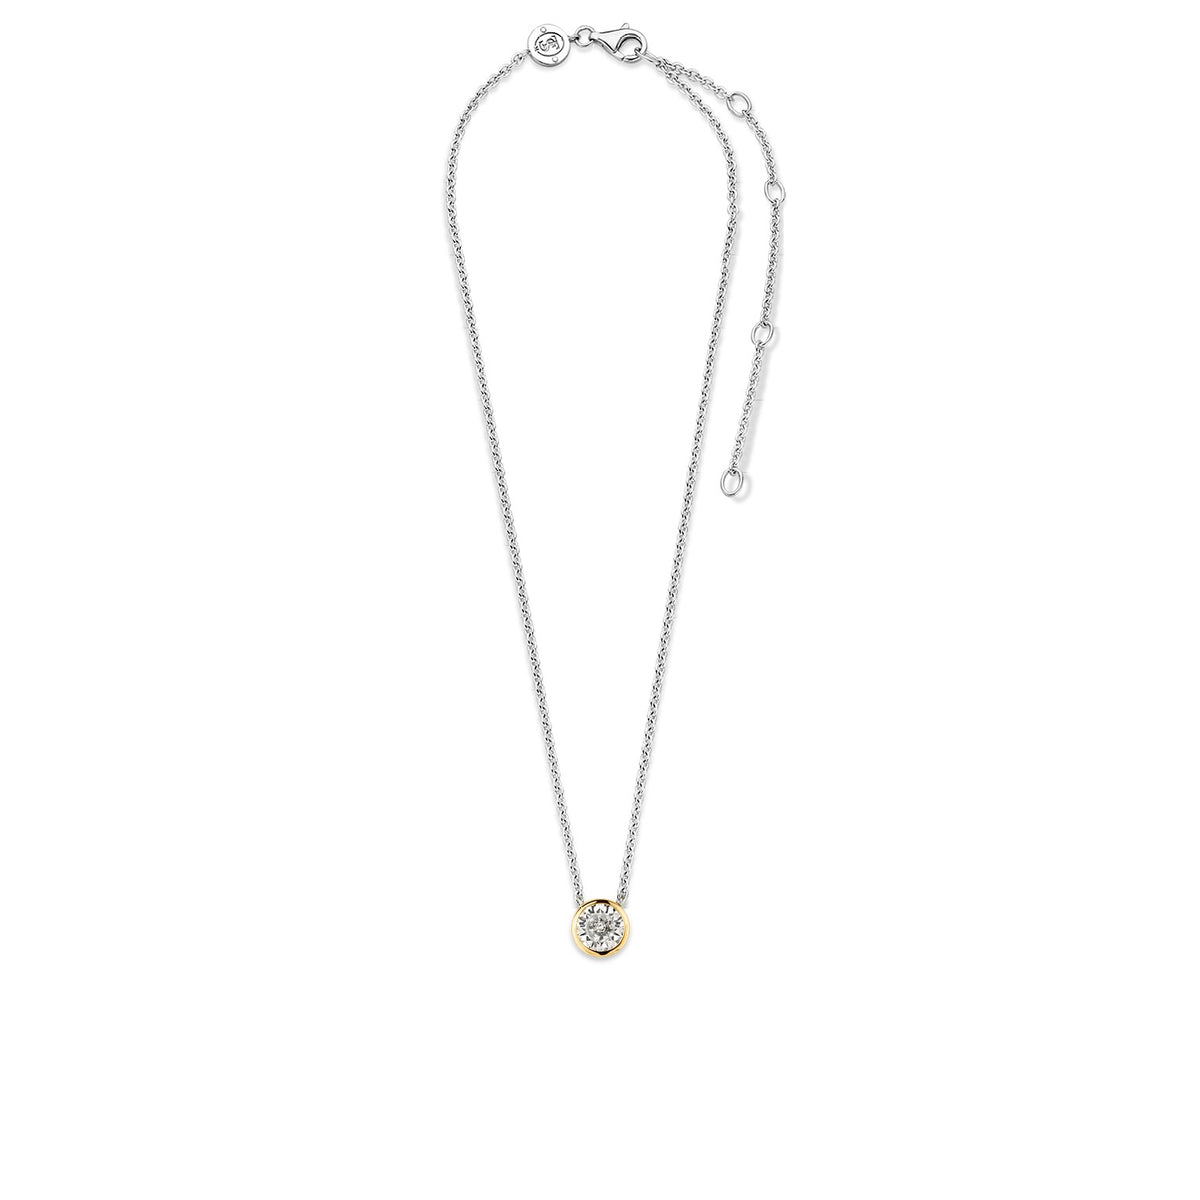 TI SENTO Sterling Silver and Gold Tone Bezel Set Cubic Zirconia Necklace